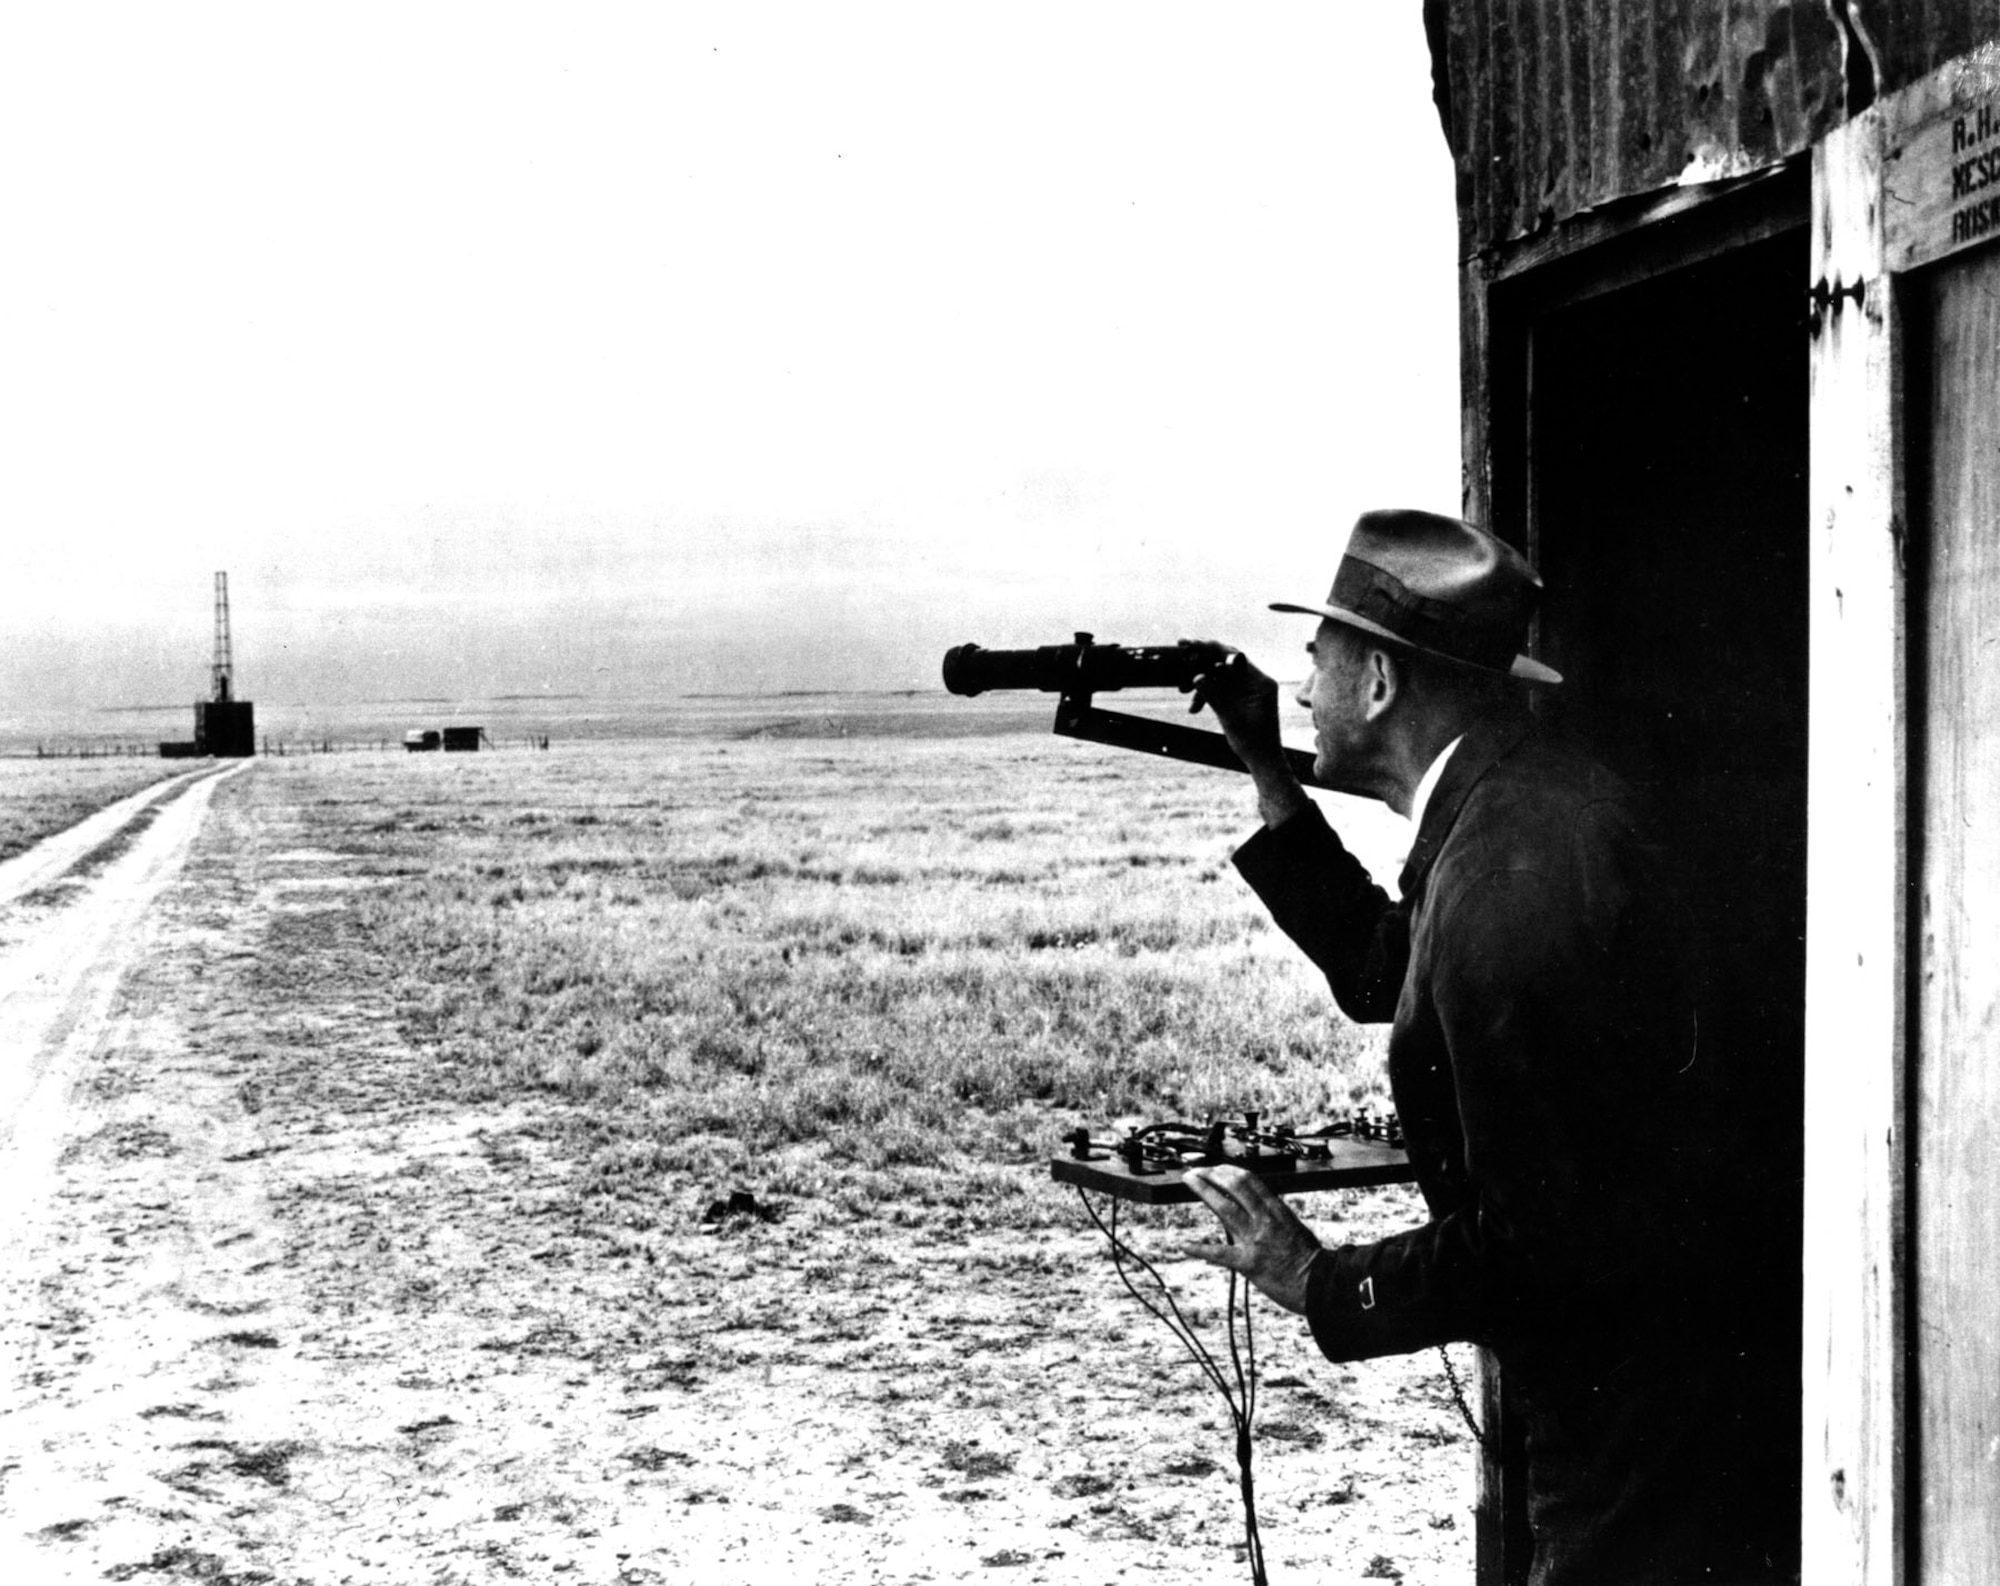 Goddard watches a New Mexico launch from a safe distance. (U.S. Air Force photo)